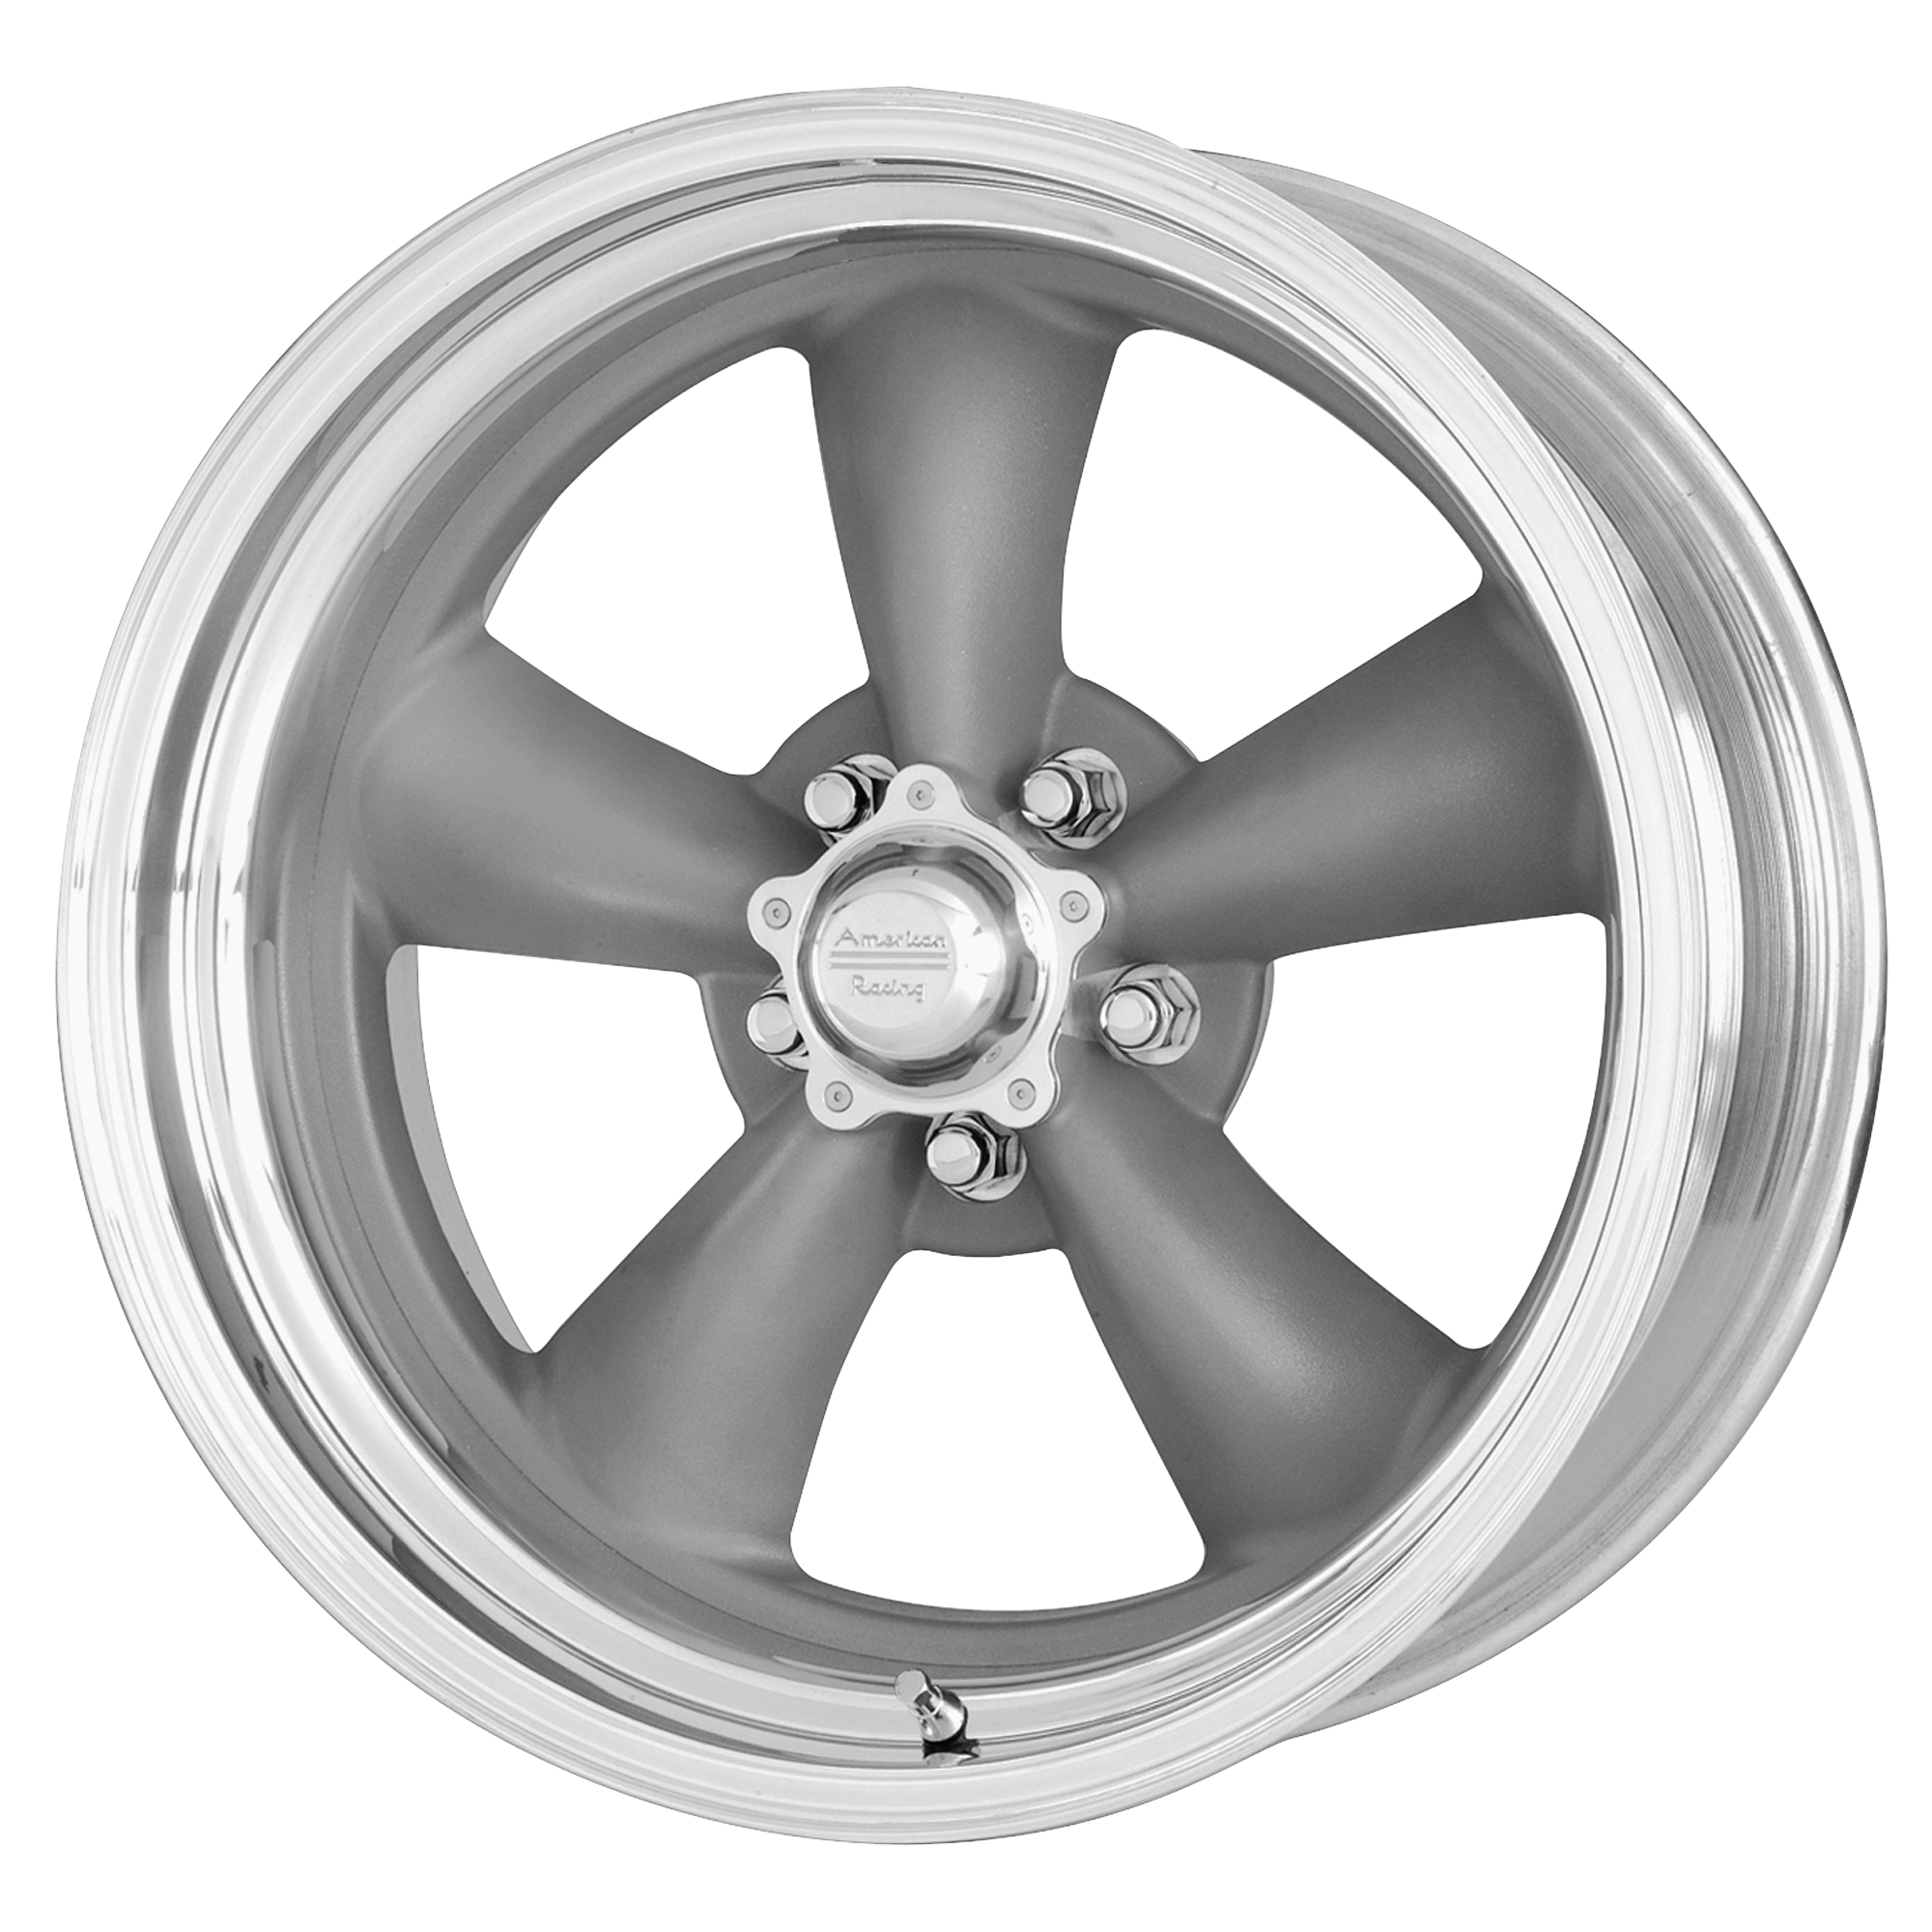 CLASSIC TORQ THRUST II ONE PIECE 16x8 5x114.30 MAG GRAY W/ MACHINED LIP (-11 mm) - Tires and Engine Performance